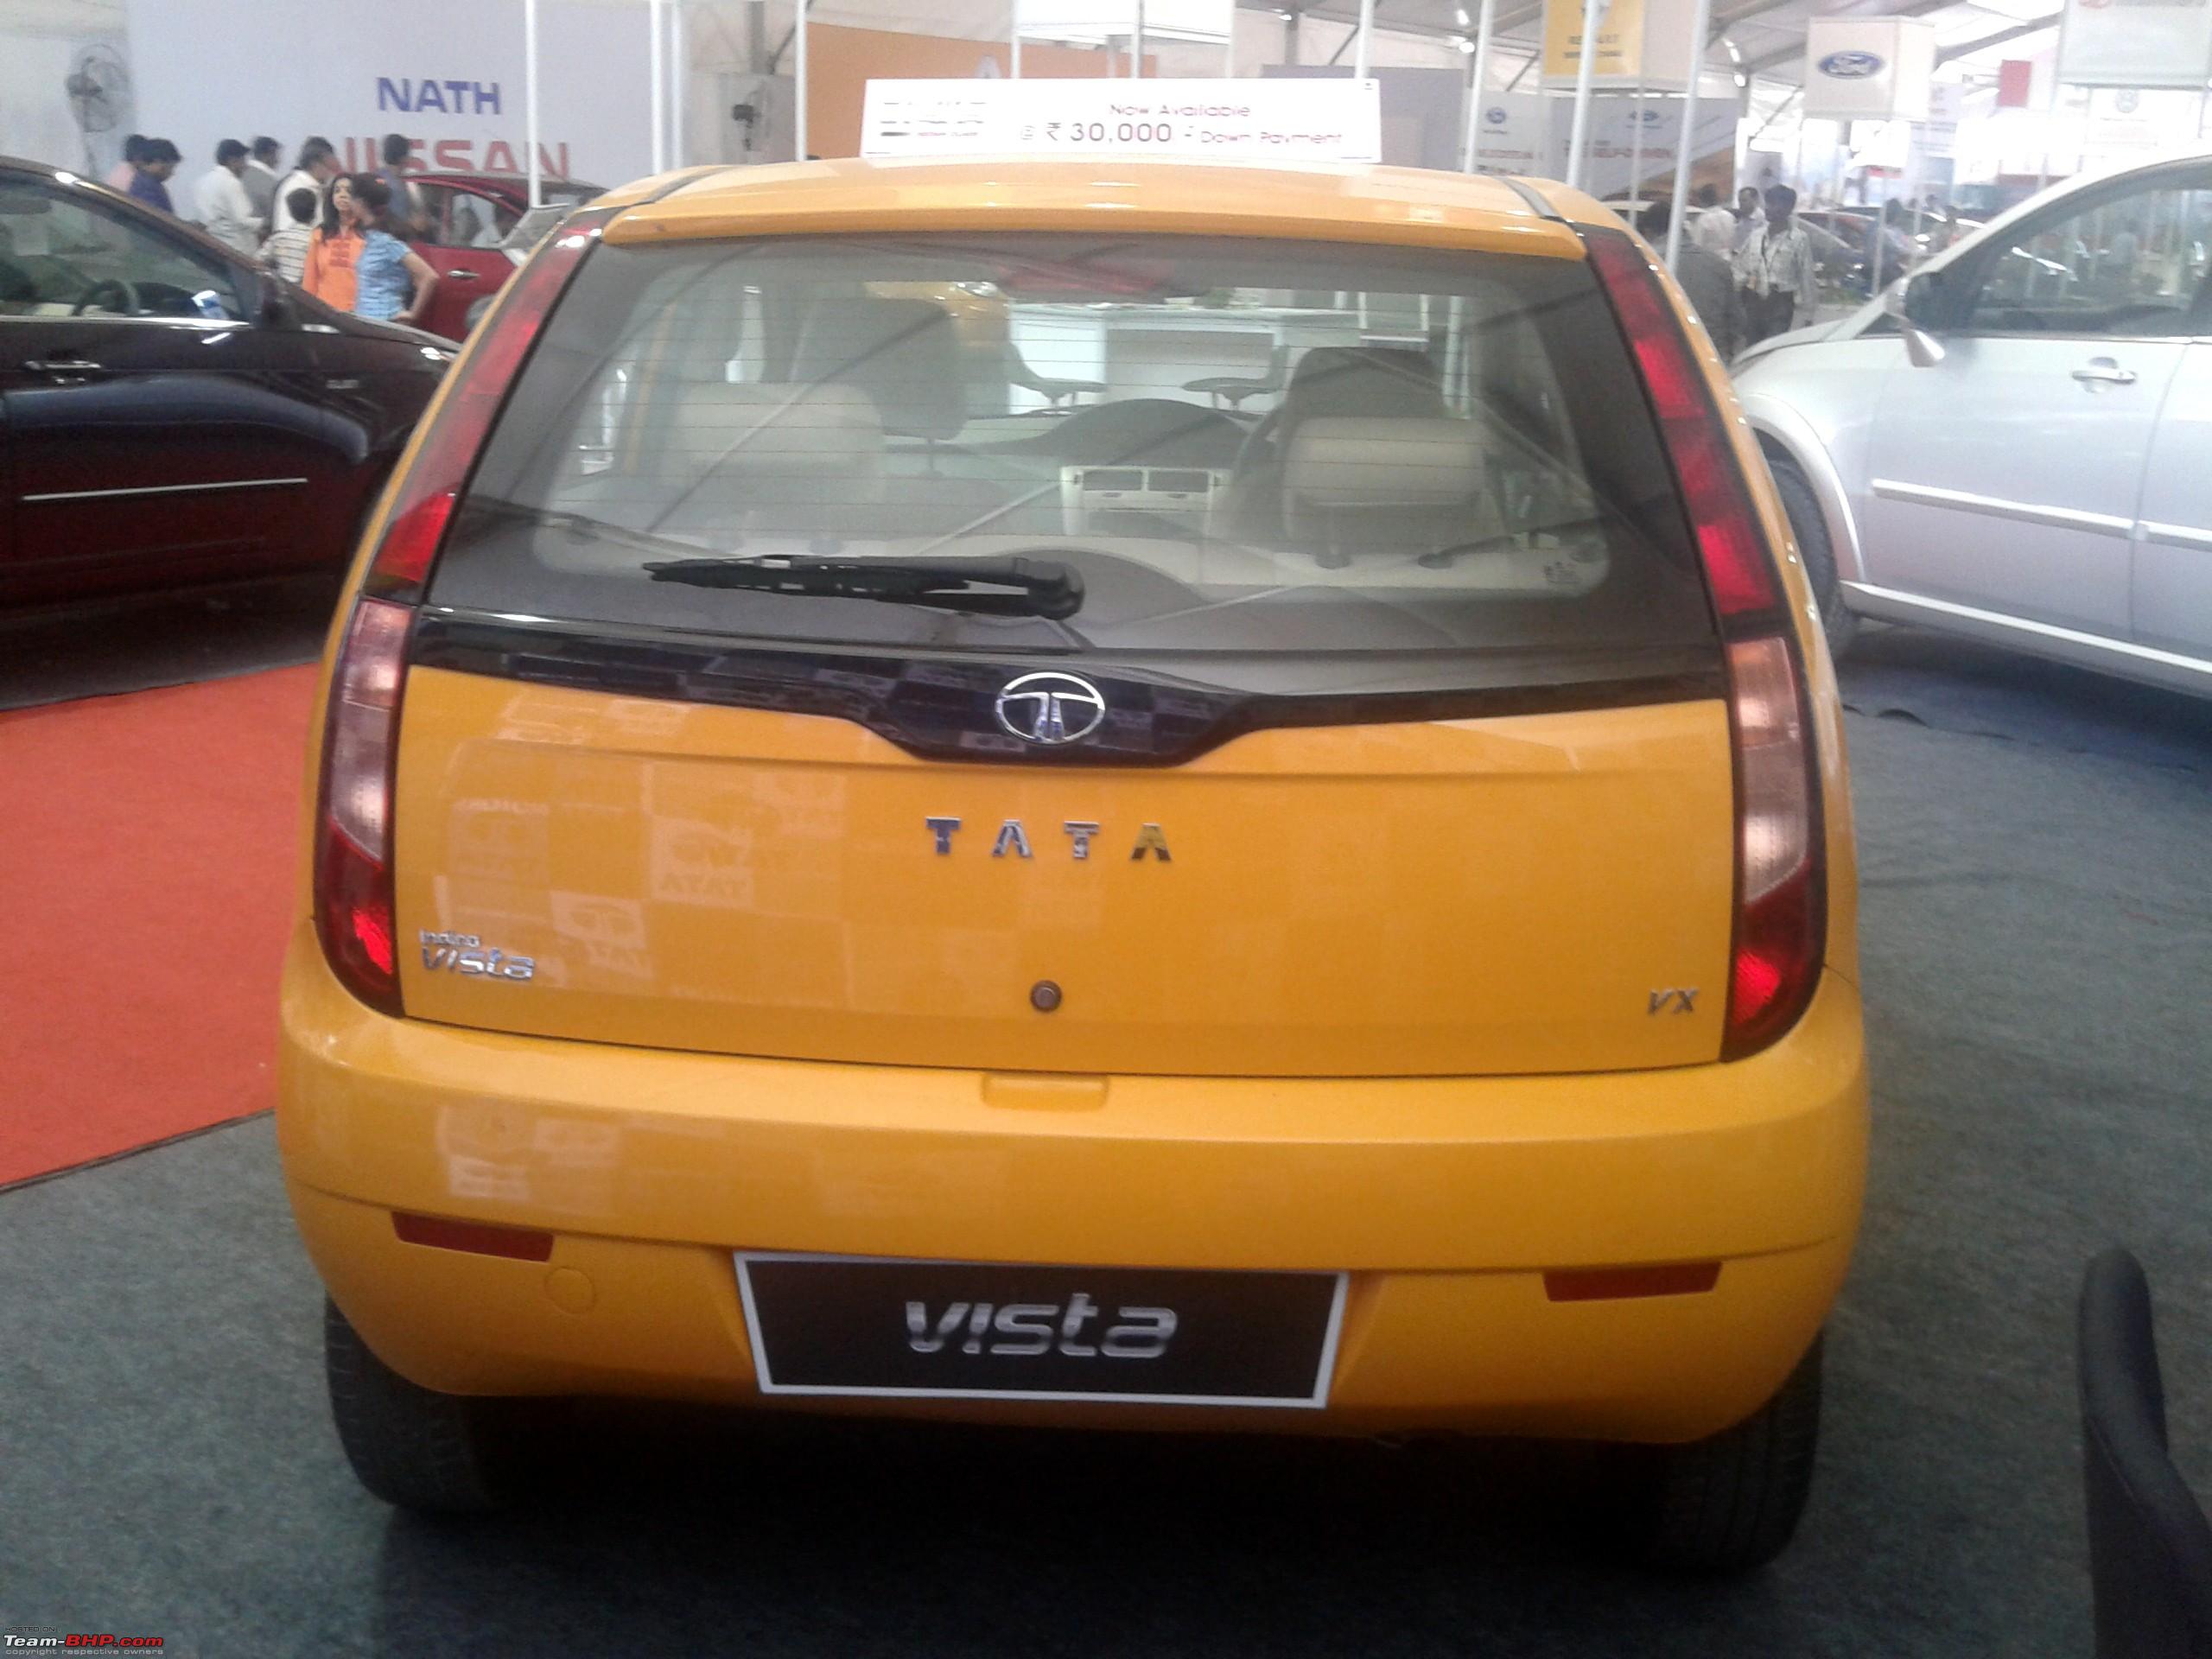 Tata Indica Vista Refresh : Test Drive & Review - Page 7 - Team-